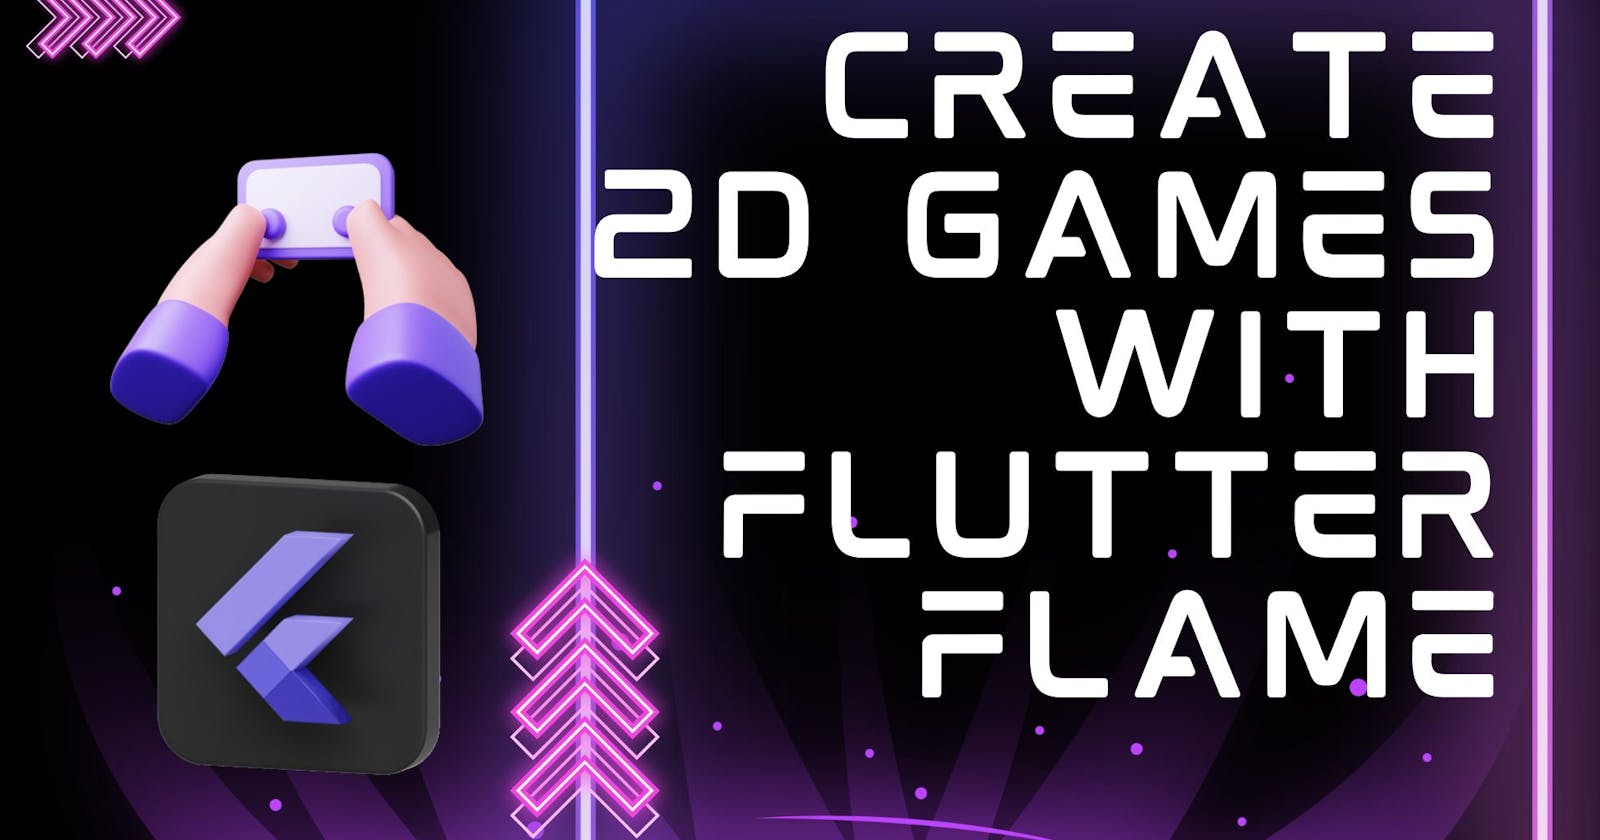 How to Create 2D Games Quickly and Easily with Flutter Flame